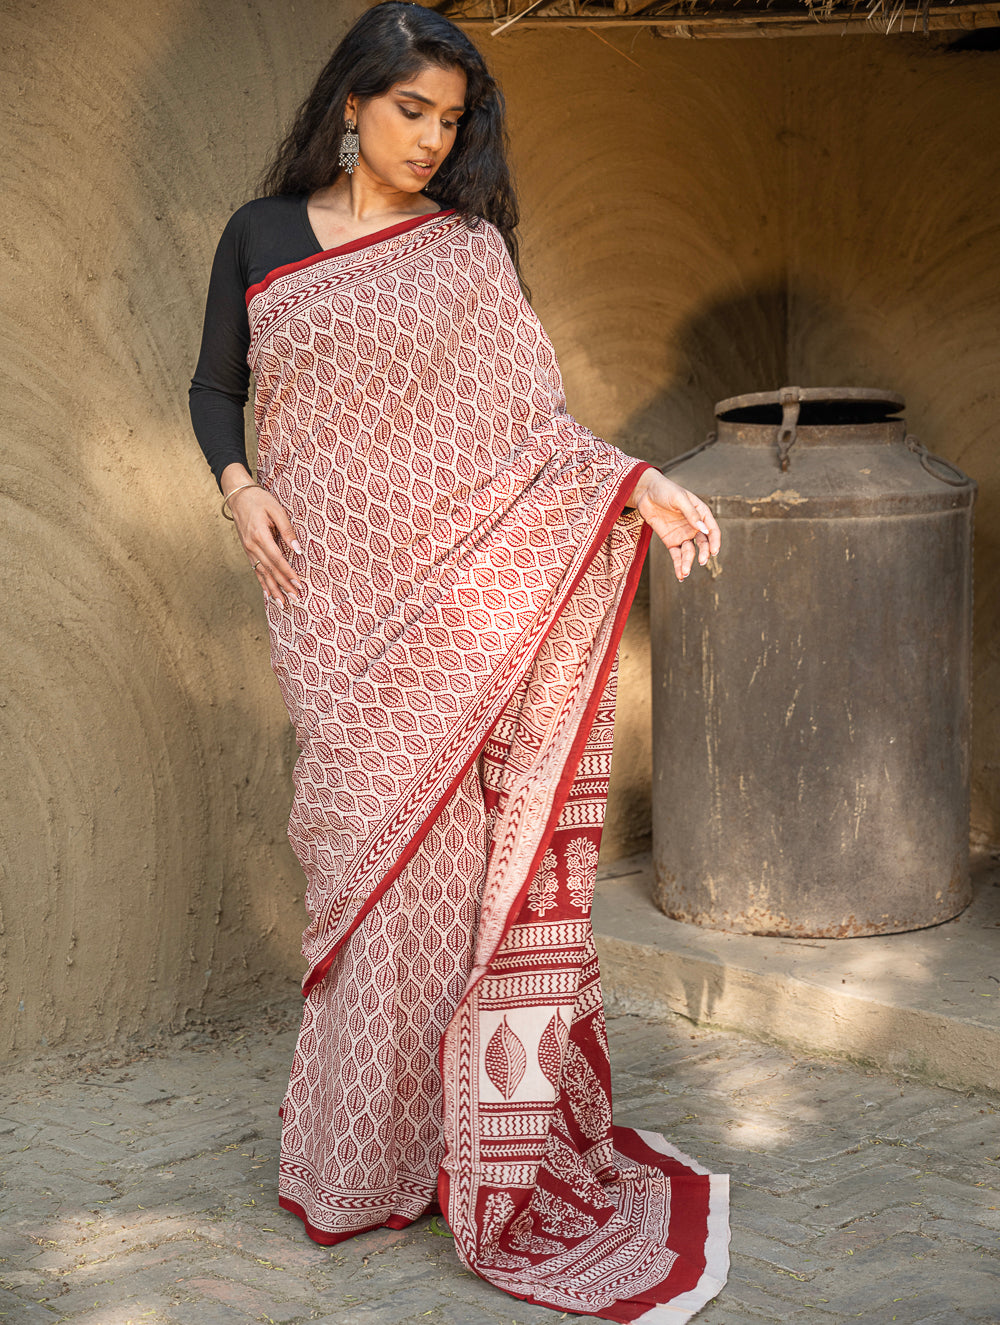 Load image into Gallery viewer, Exclusive Bagh Hand Block Printed Cotton Saree - Leaf Ornate